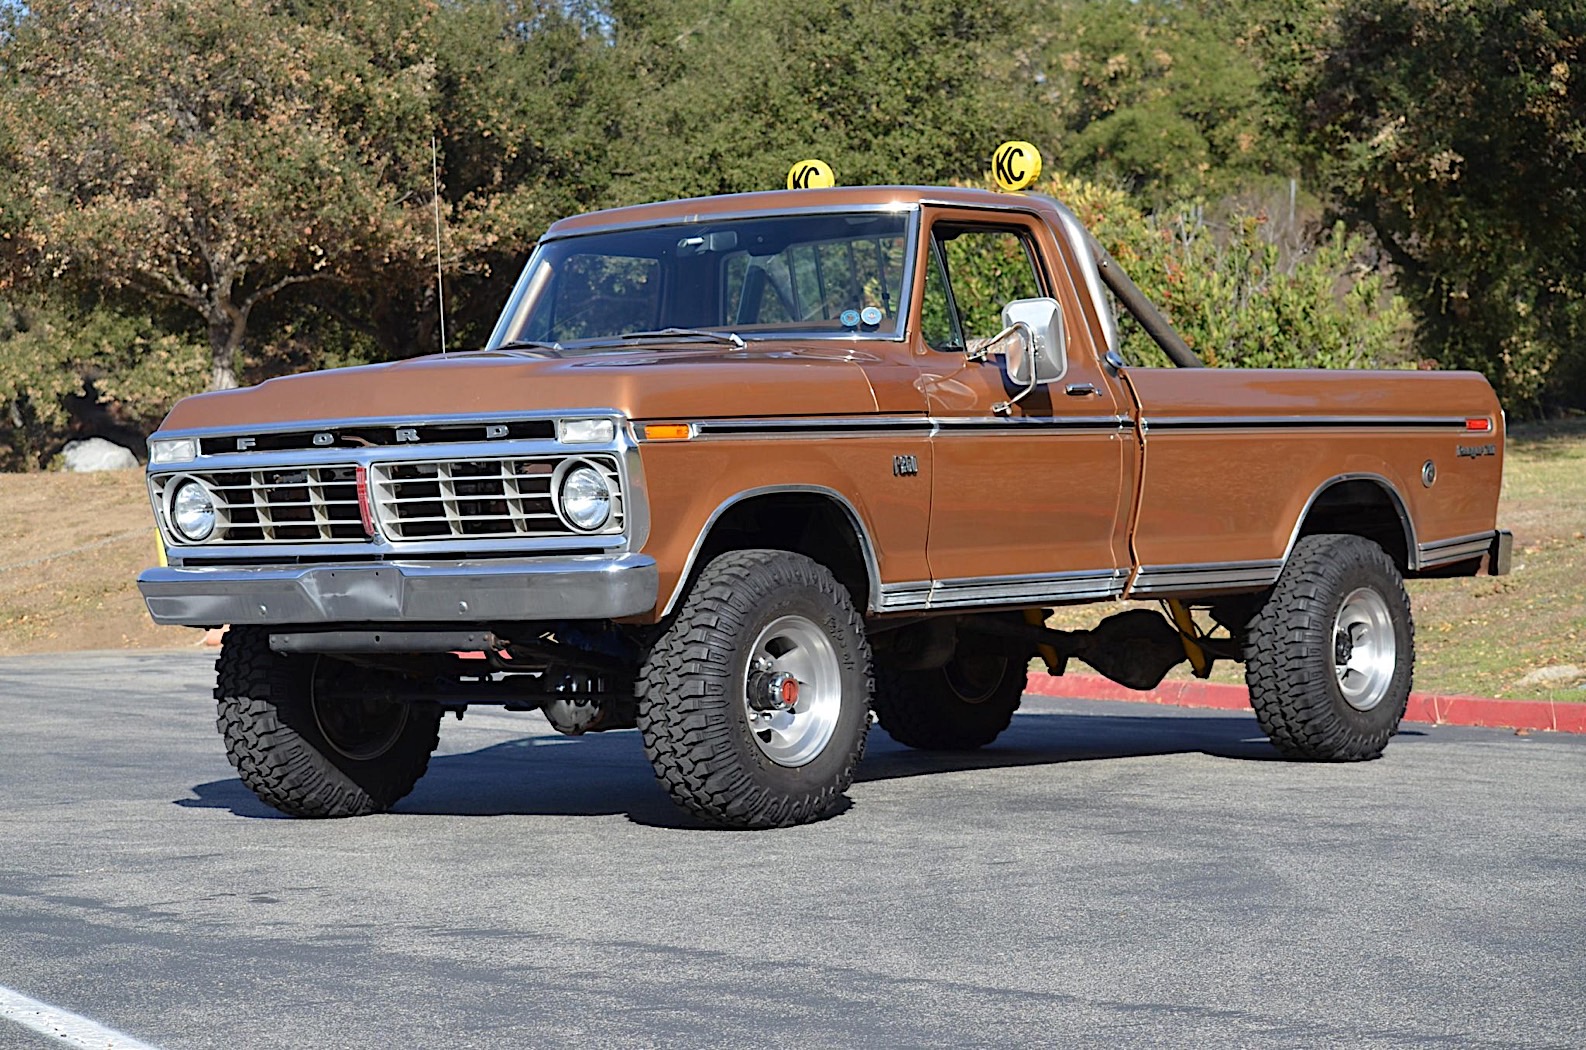 ford-f-250-ranger-looks-straight-out-of-a-1970s-action-flick-stored-for-decades-153660_1.jpg